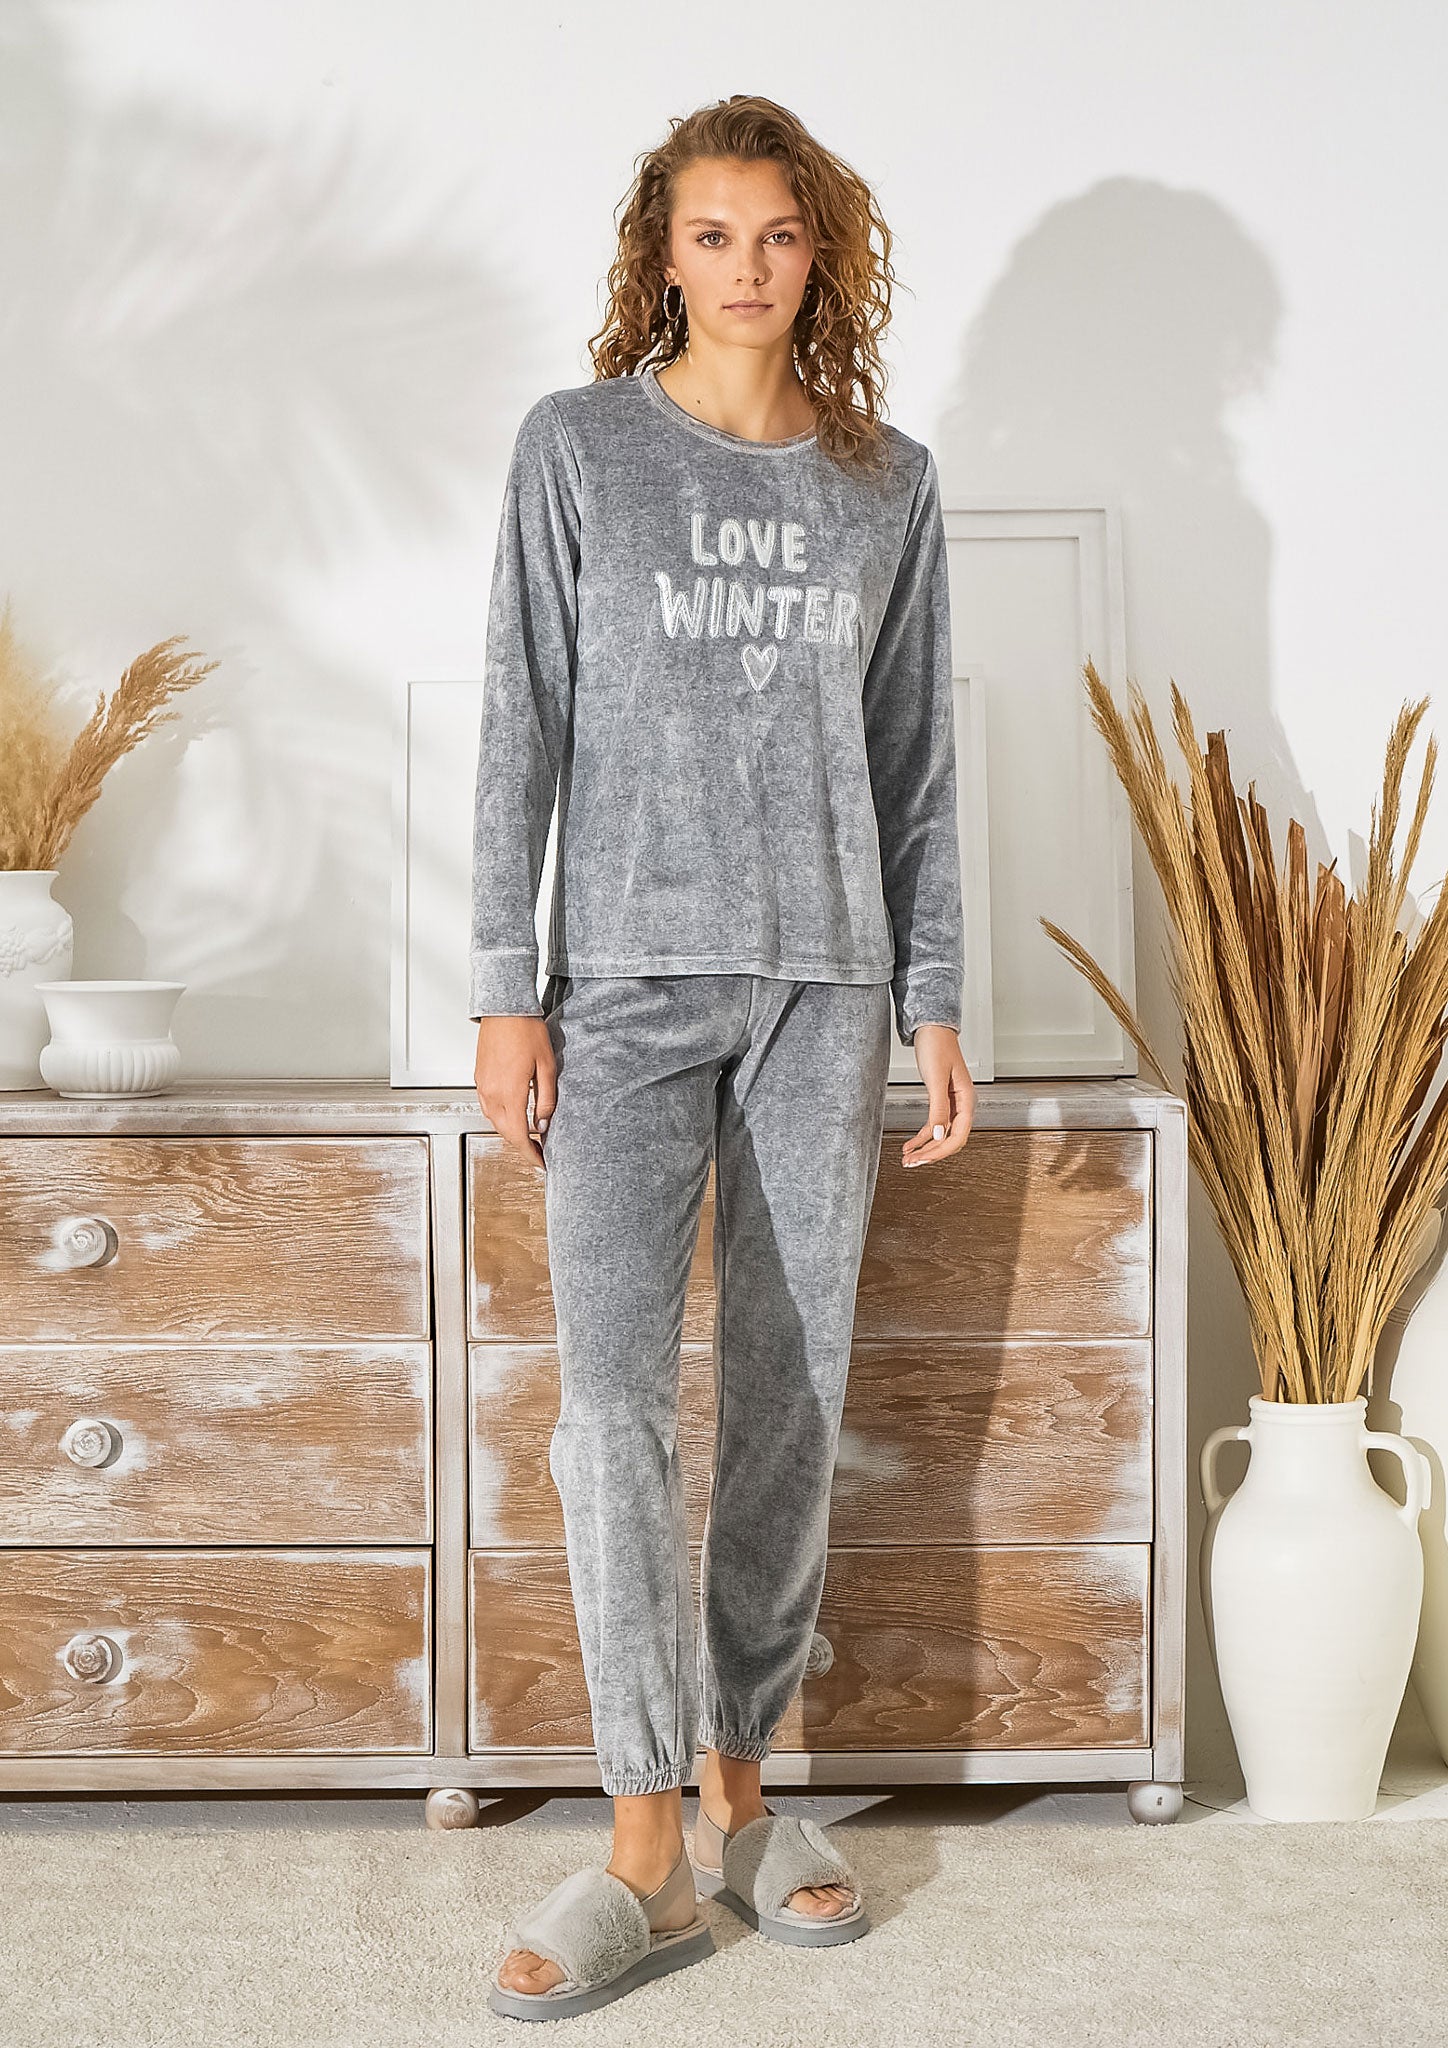 Zecotex New Winter Collection Pajama 2 Pieces/Cotton Velvet Plush/Sabrina  Basin with Wide Long Sleeves/Front Embroidery Sweatshirt & Plain  Pants/Comfortable Home Wear Trousers (Grey, XL) price in Egypt,   Egypt